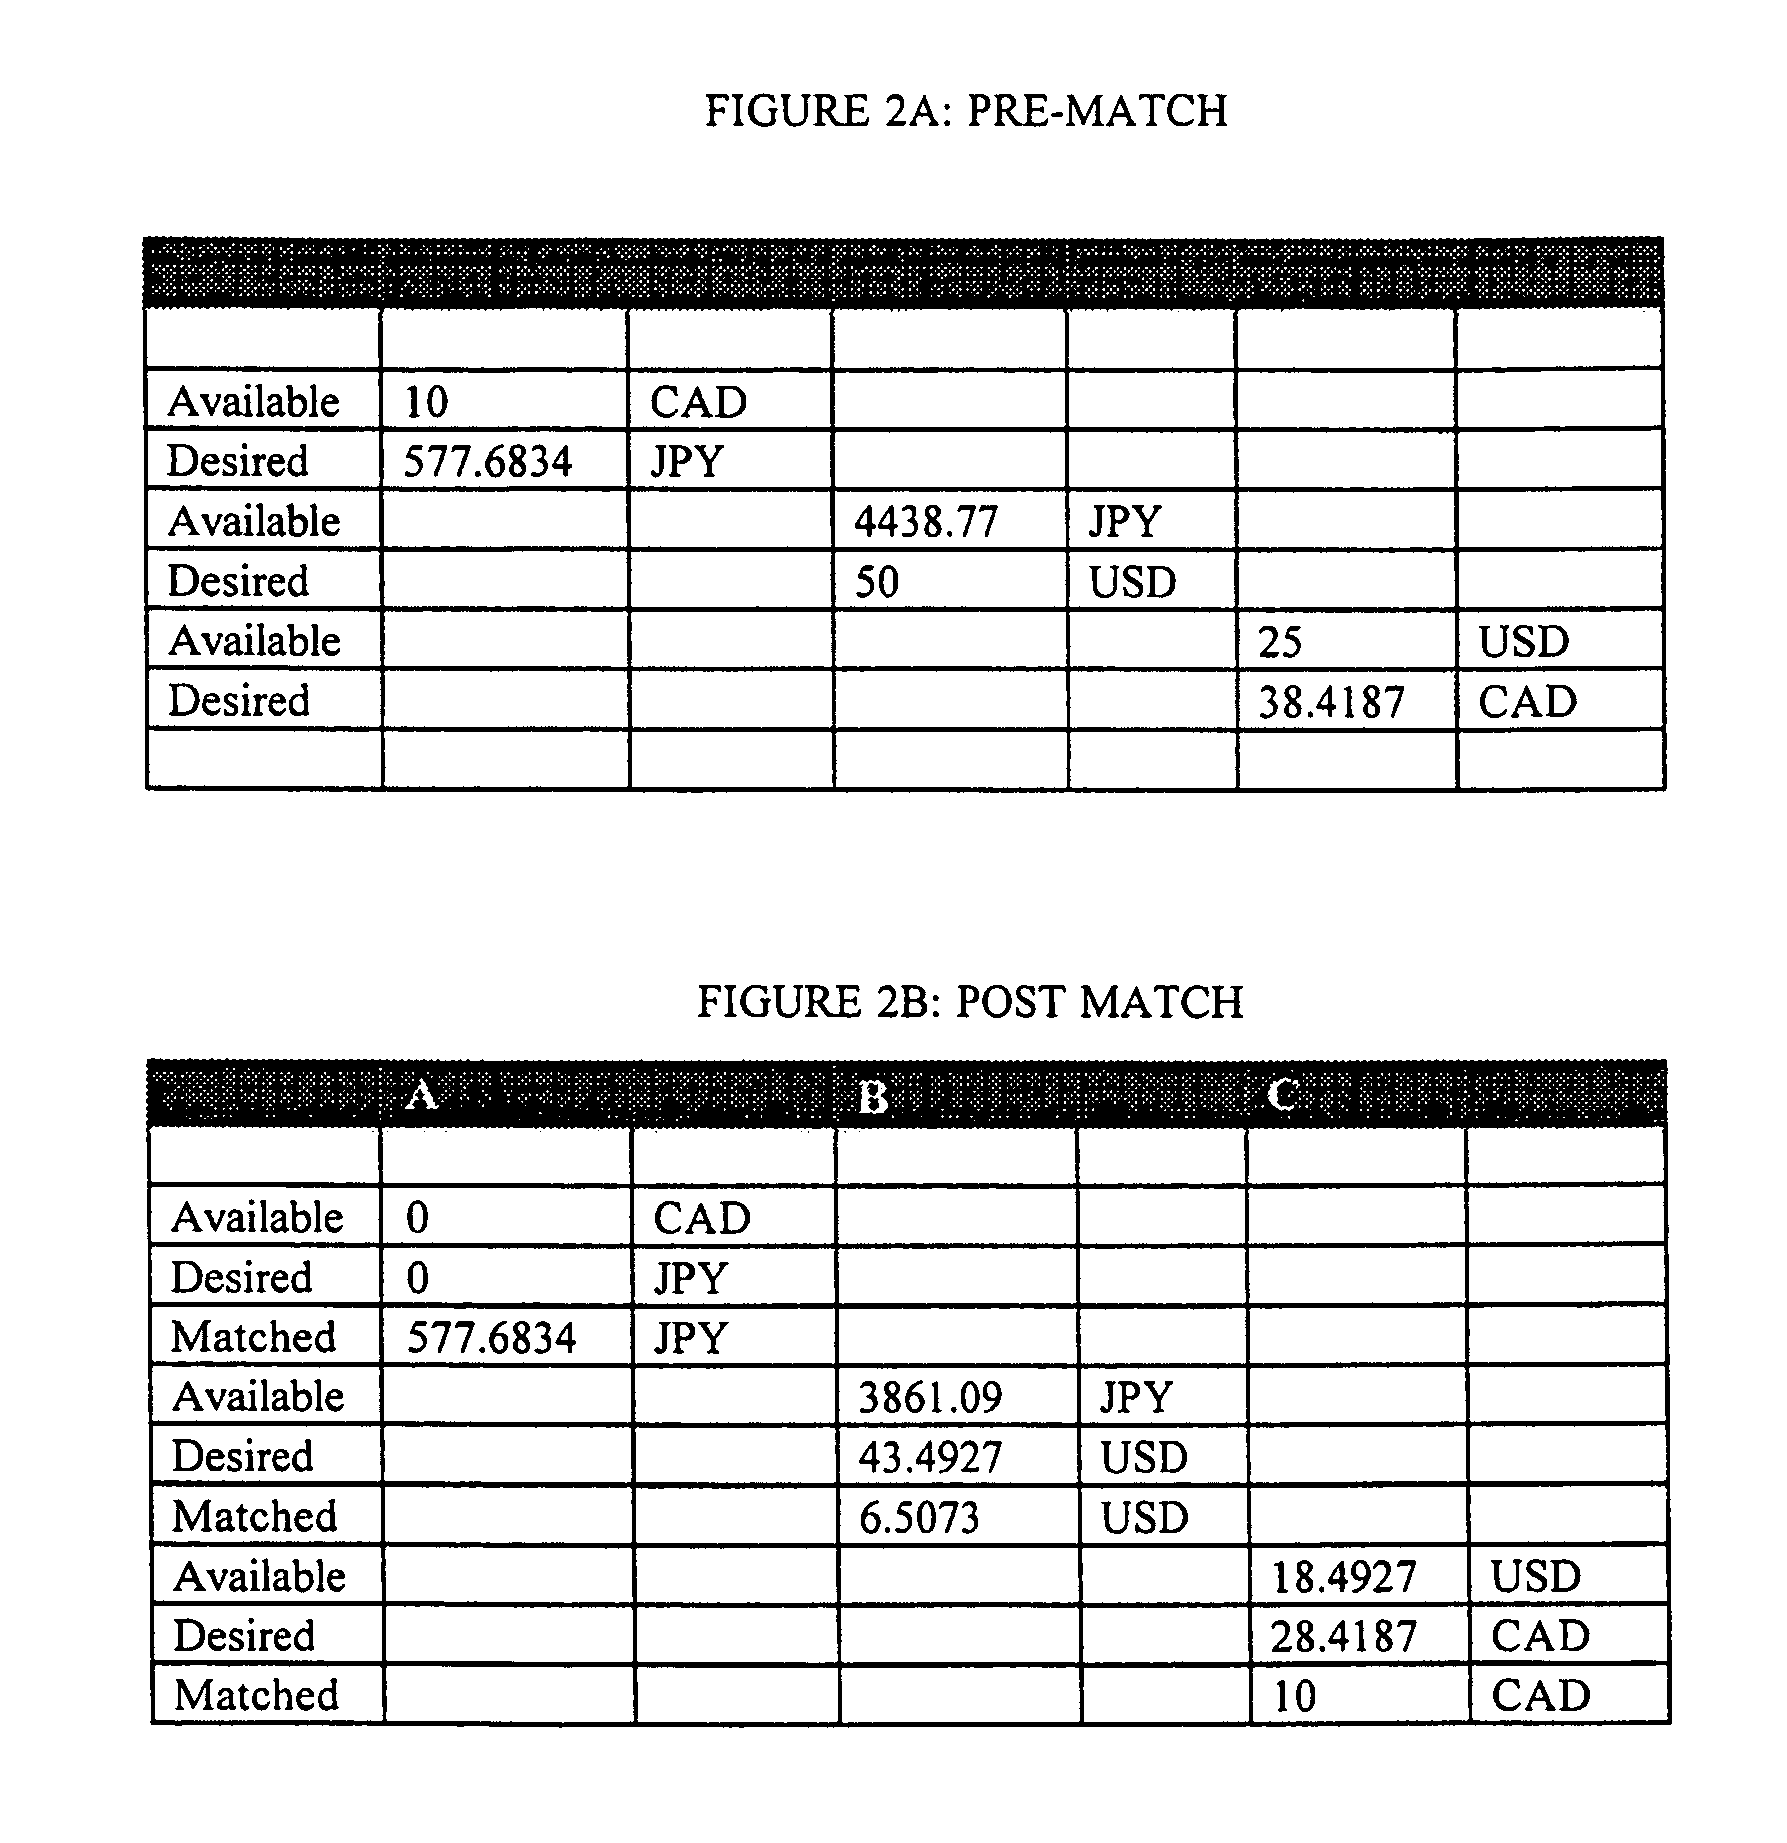 Computer based matching system for party and counterparty exchanges